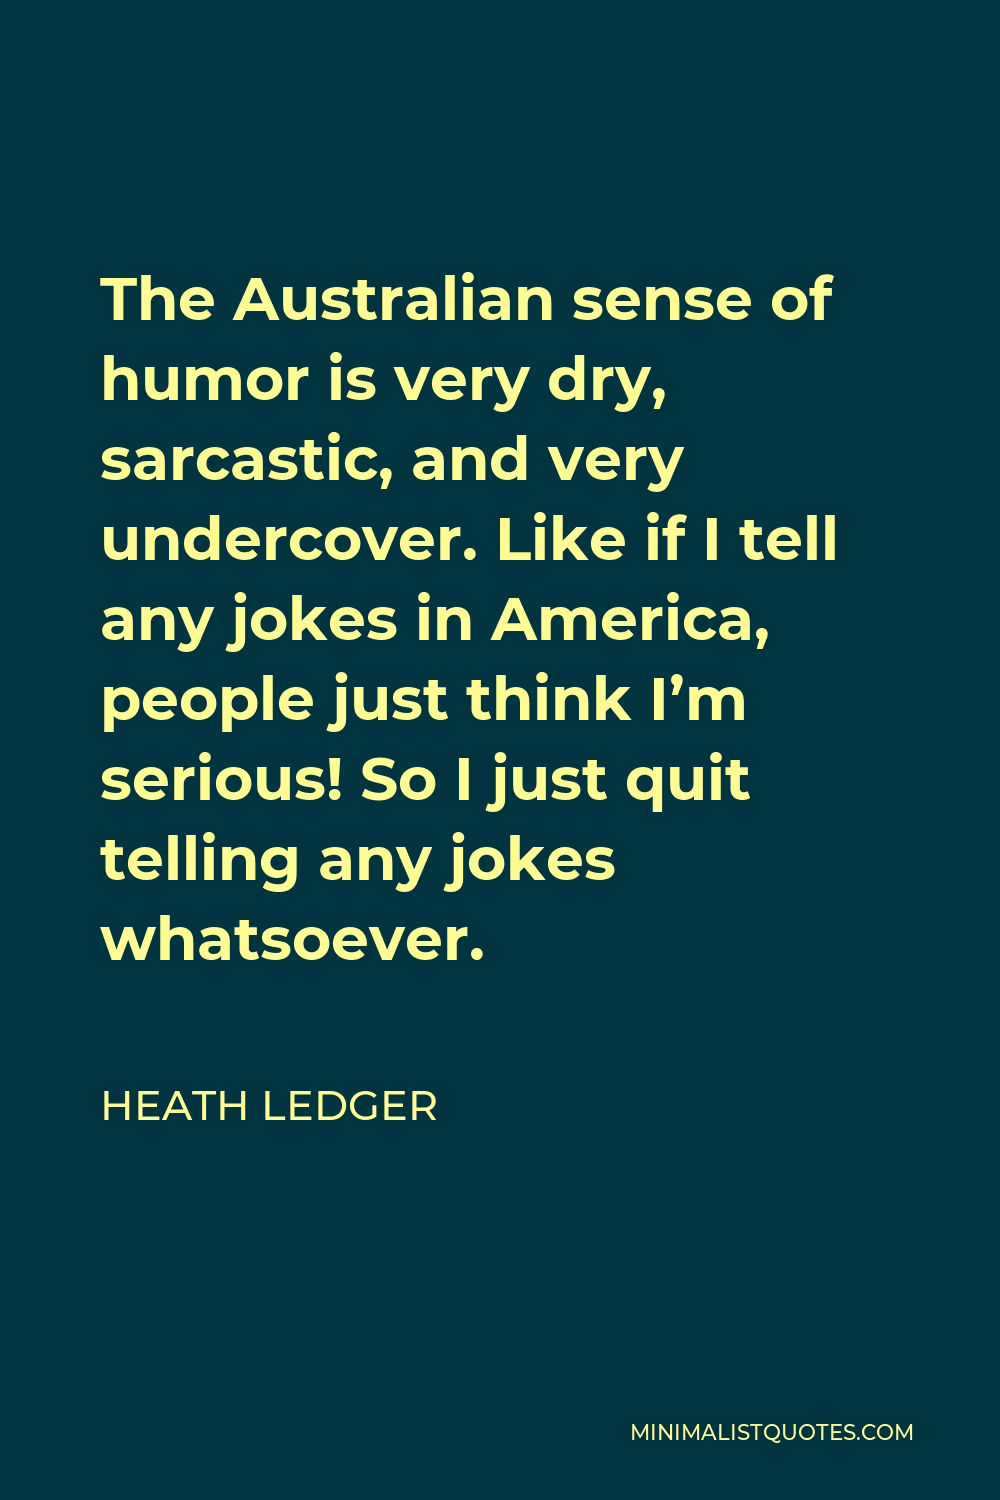 Heath Ledger Quote - The Australian sense of humor is very dry, sarcastic, and very undercover. Like if I tell any jokes in America, people just think I’m serious! So I just quit telling any jokes whatsoever.